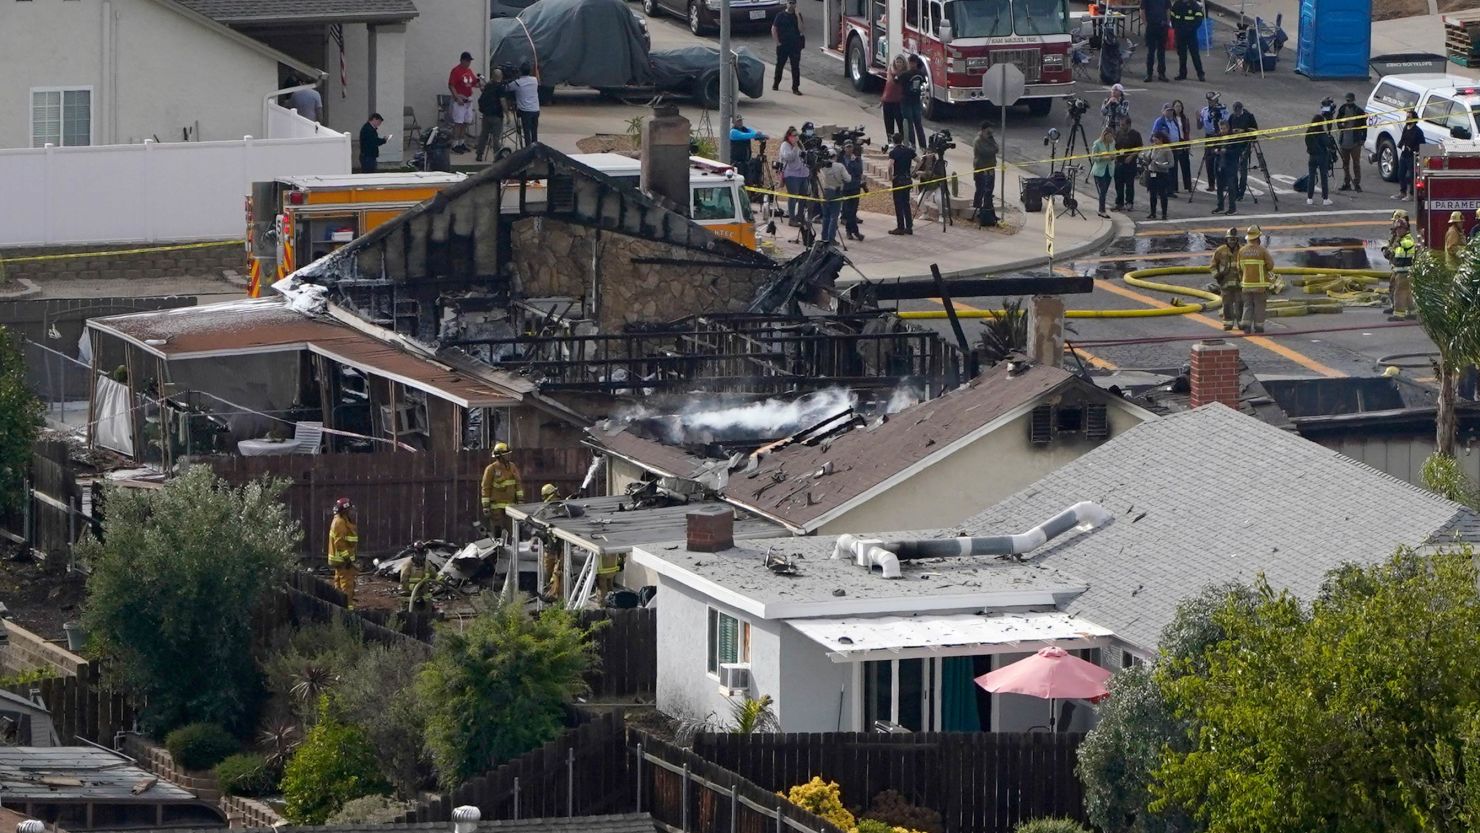 Emergency crews work the scene of a small plane crash in Santee, Calif., that killed two people, injured two others and set two homes ablaze.